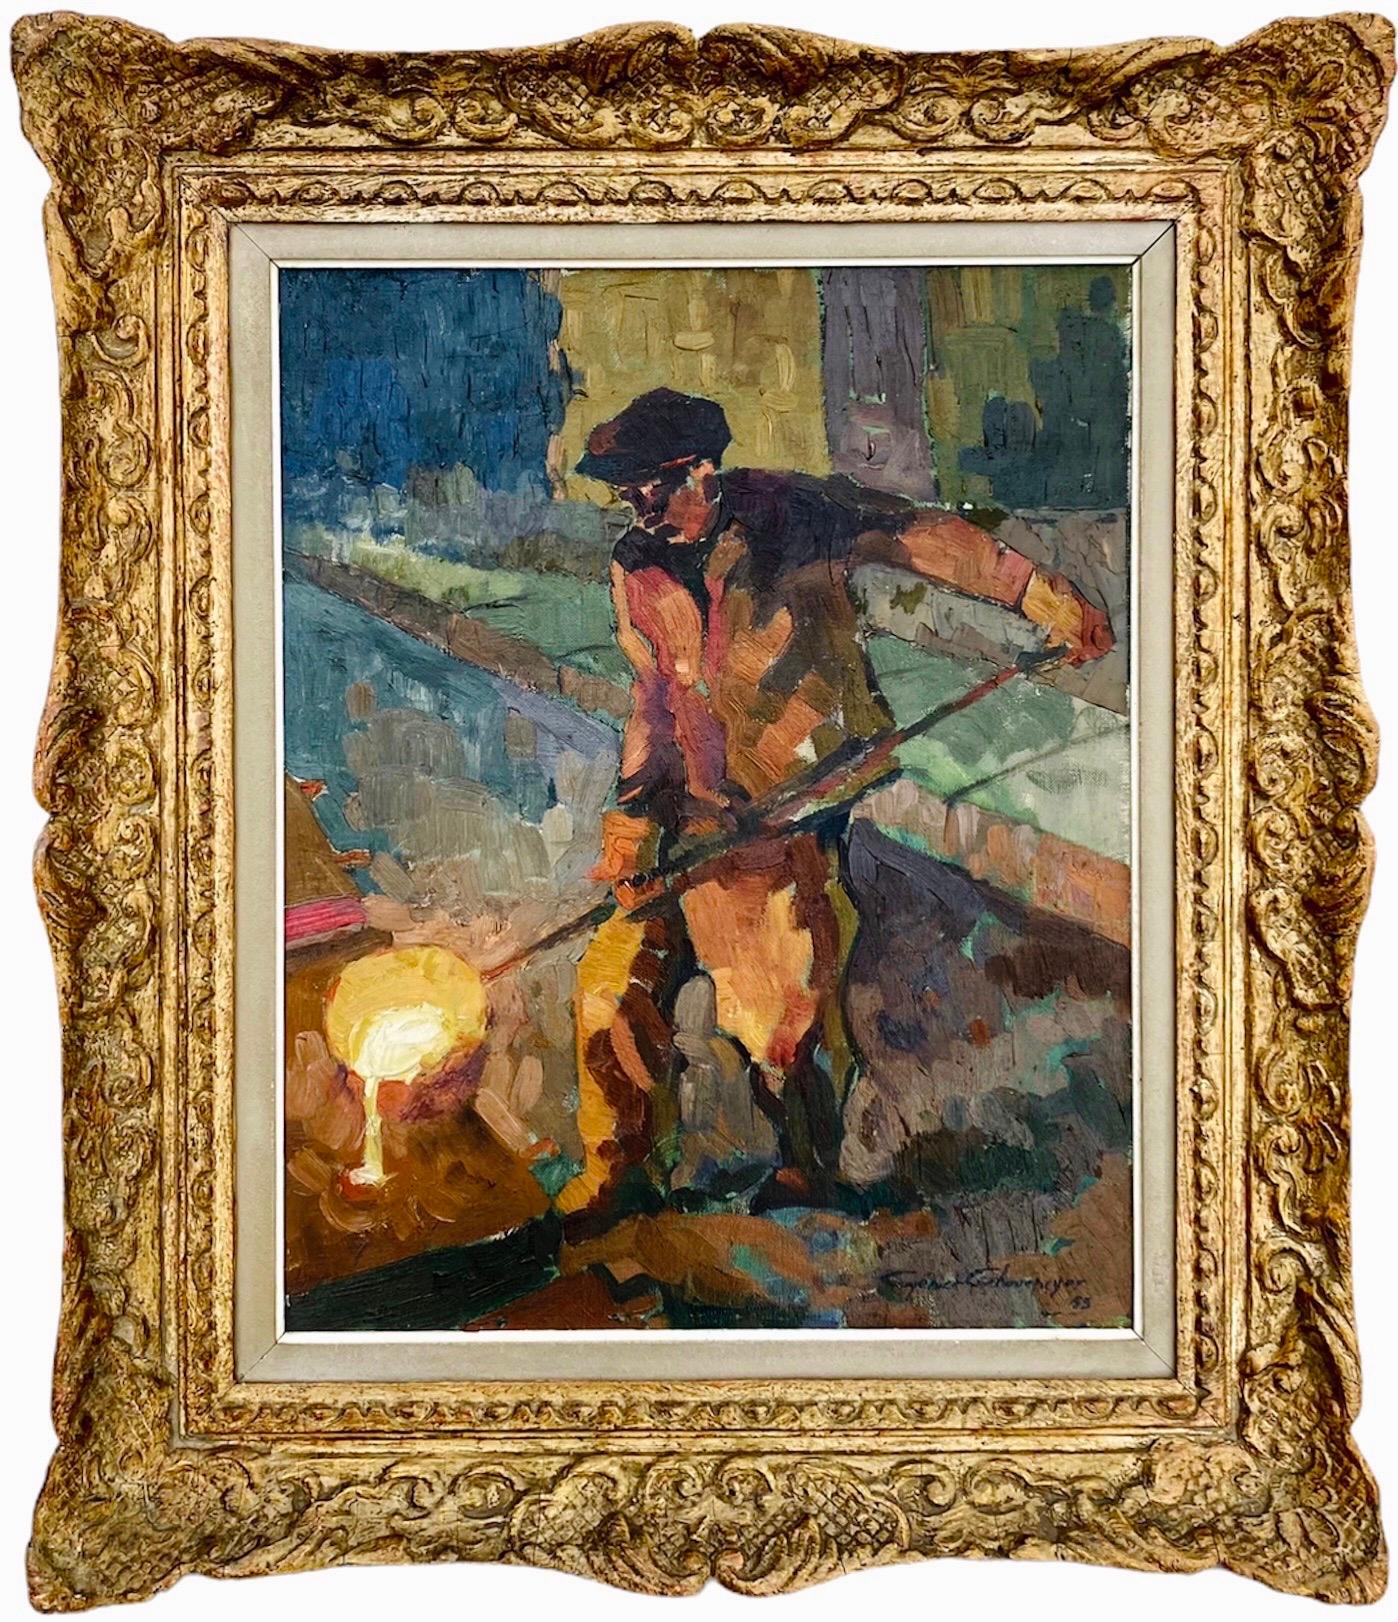 Albert Chavepeyer Figurative Painting - Post Impressionist painting - à la fonderie - At the foundry - 1950s Van Gogh